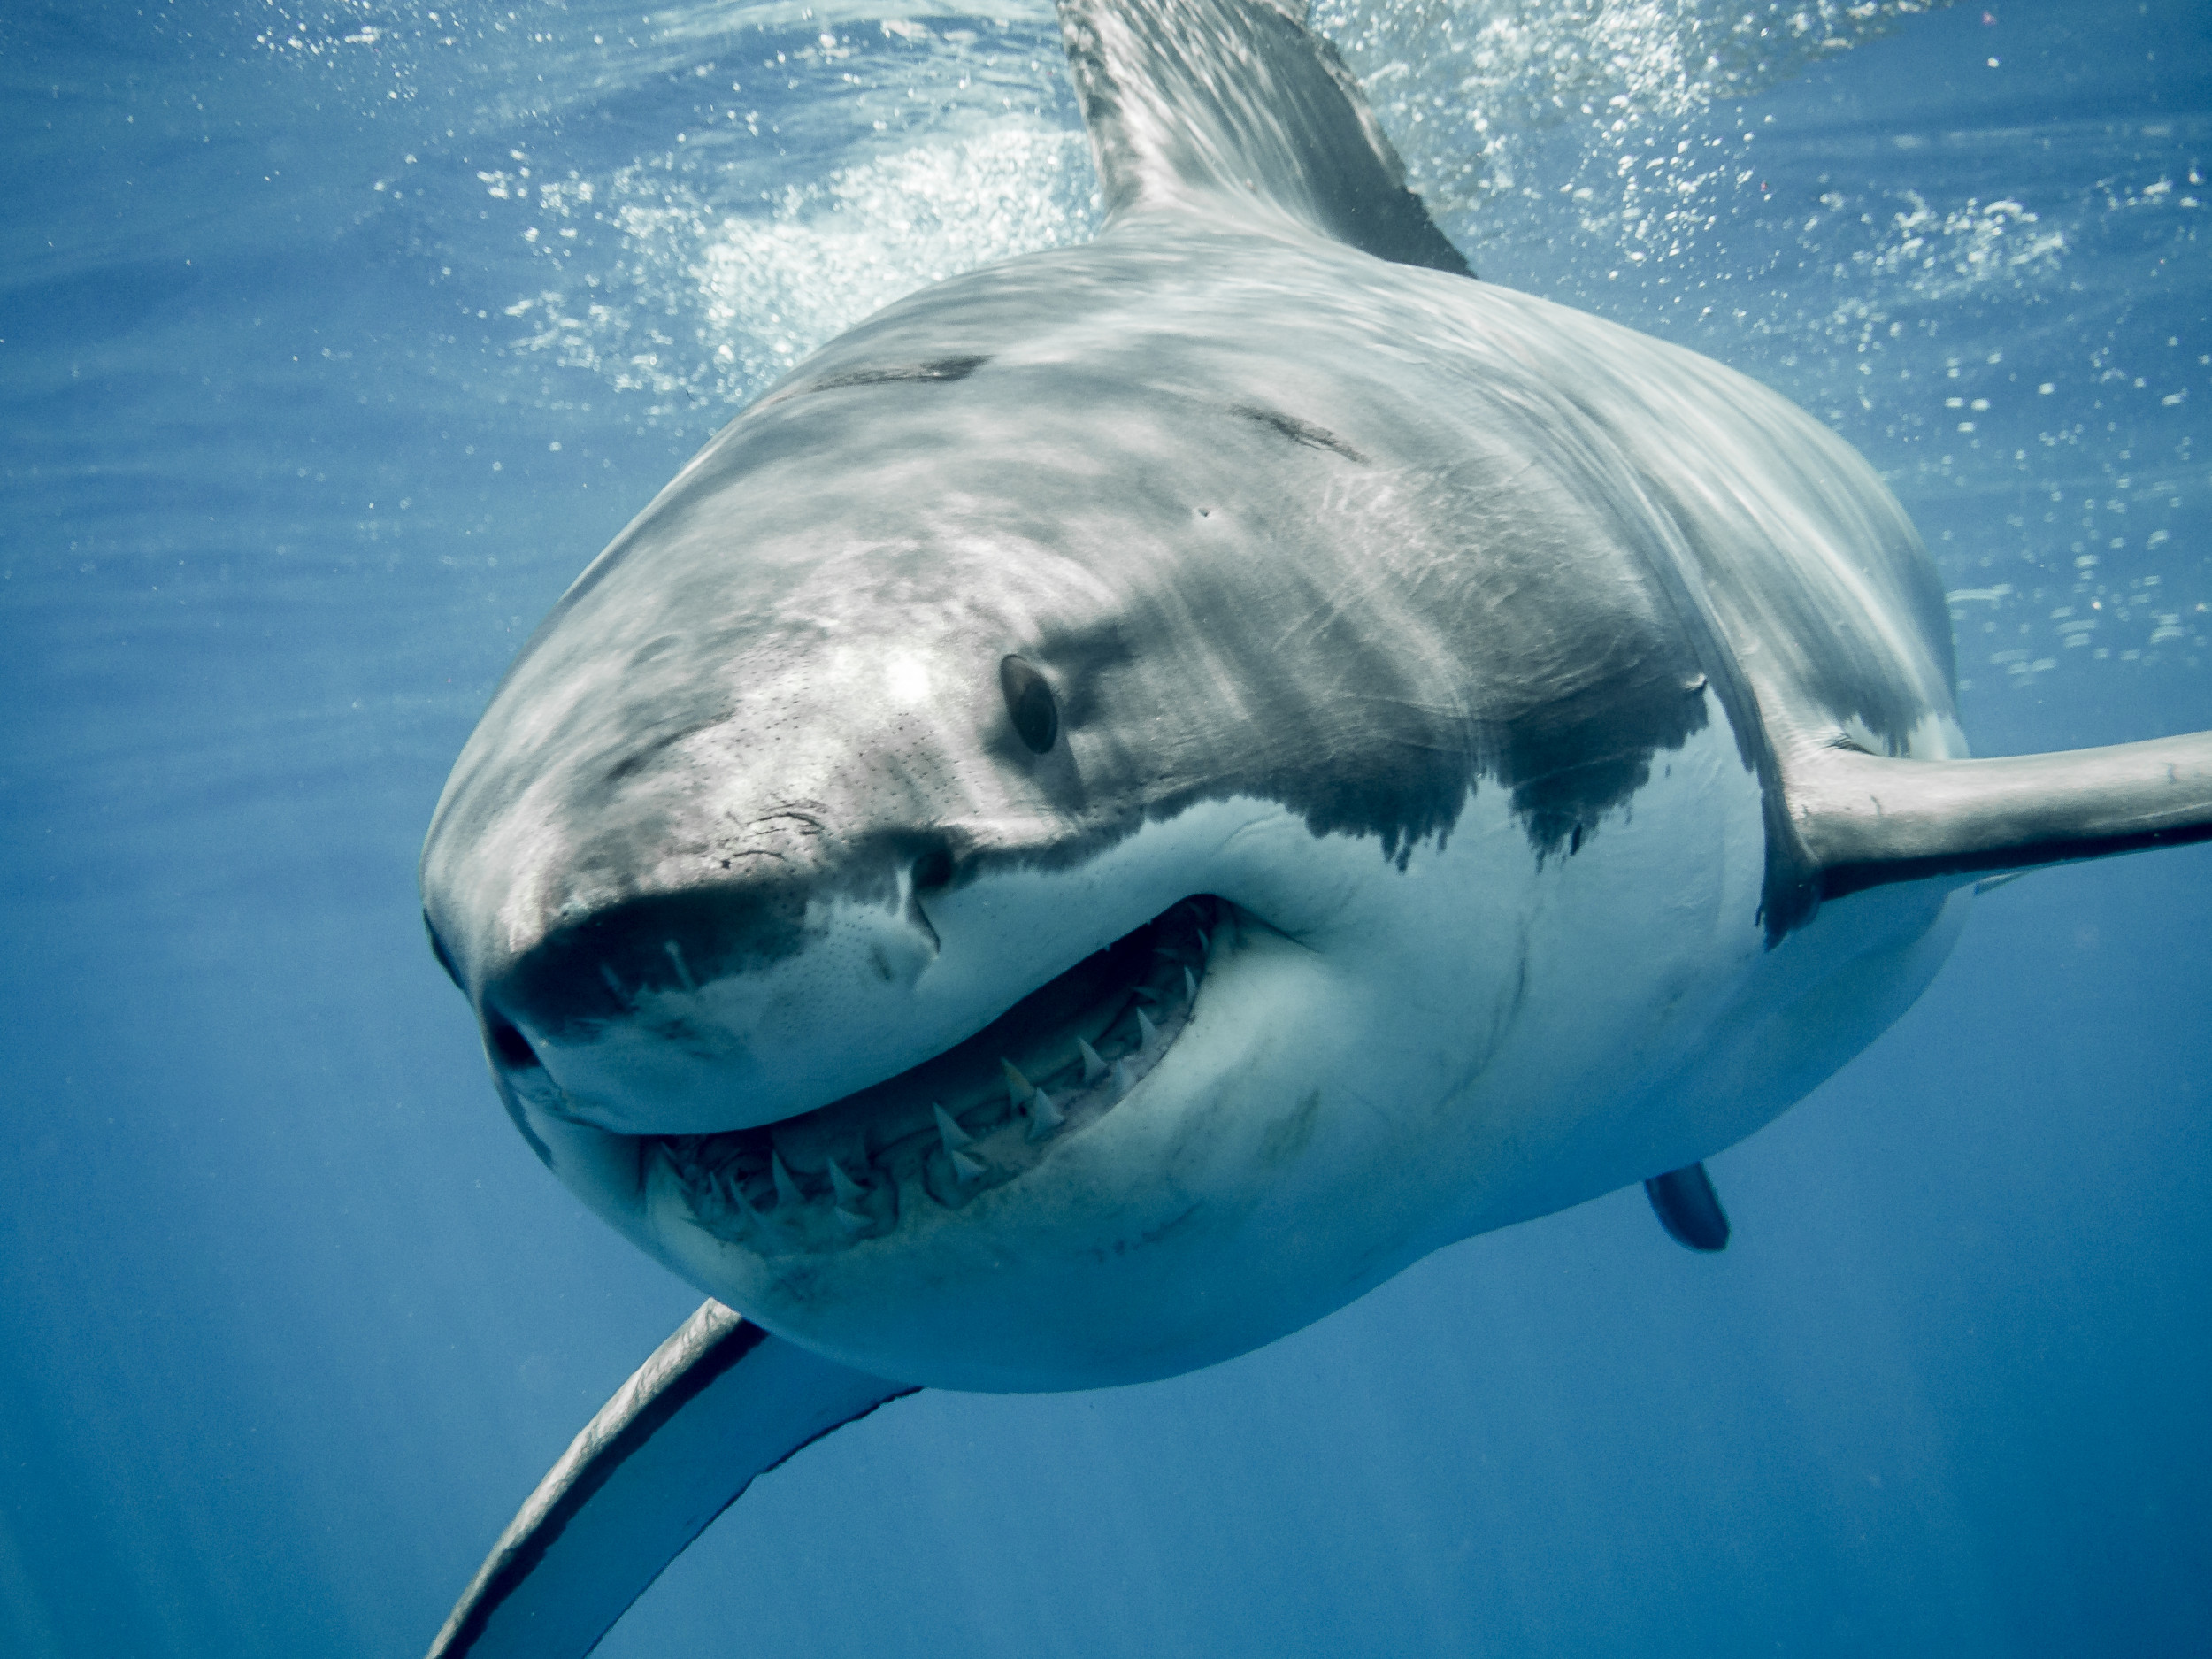 1,400-pound great white shark Breton being tracked along Jersey Shore 